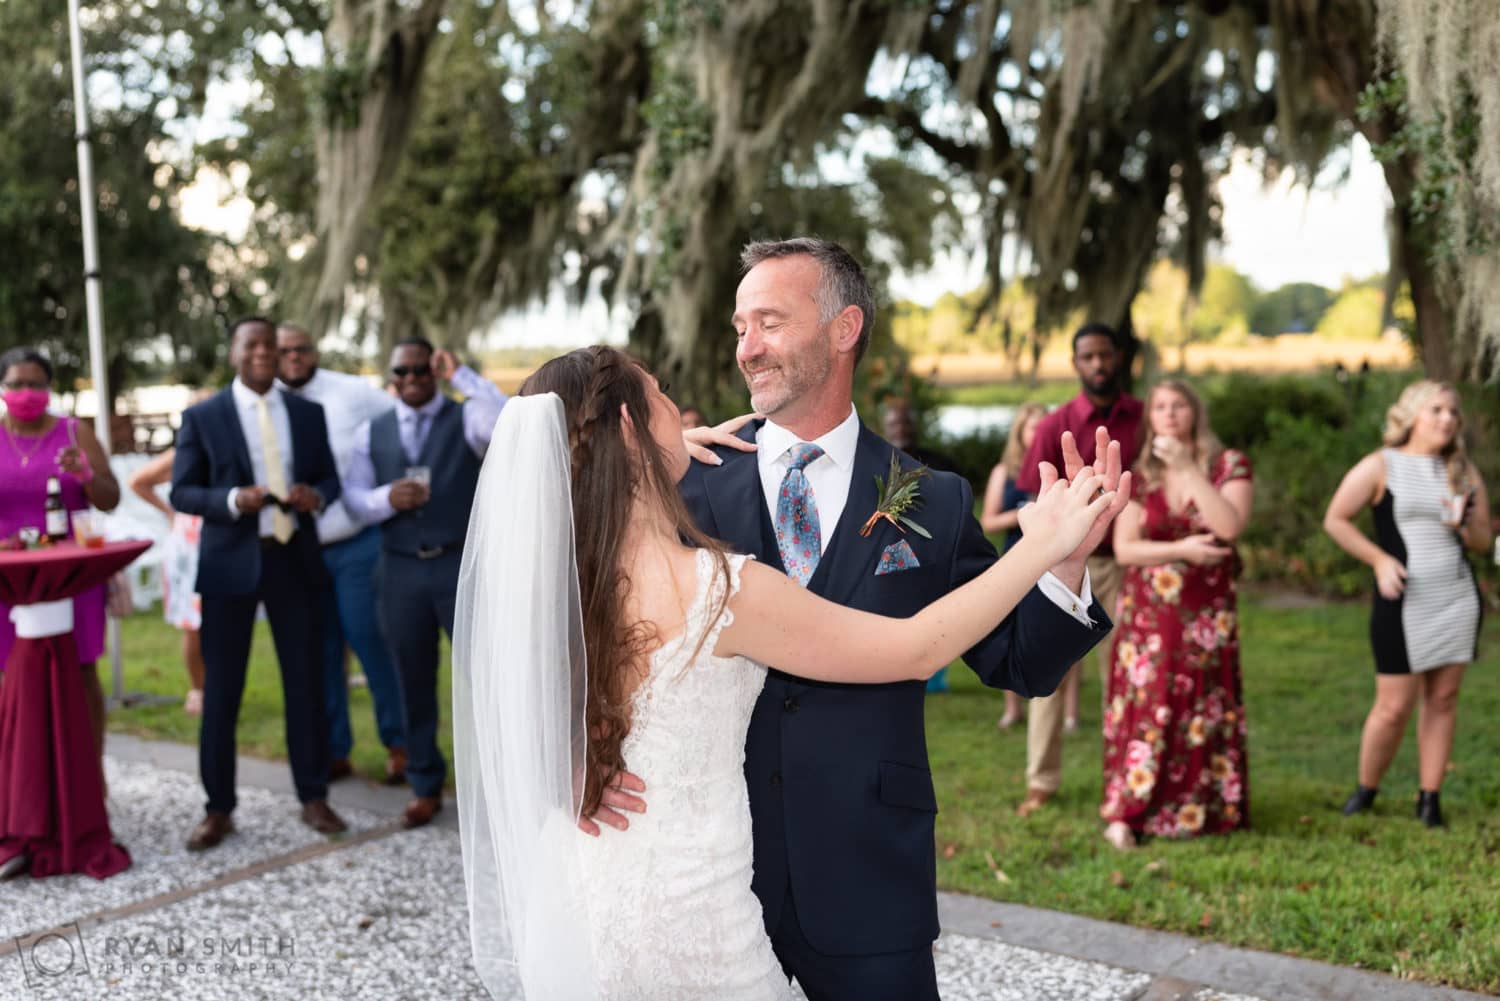 Emotional dance with bride and father - Magnolia Plantation - Charleston, SC